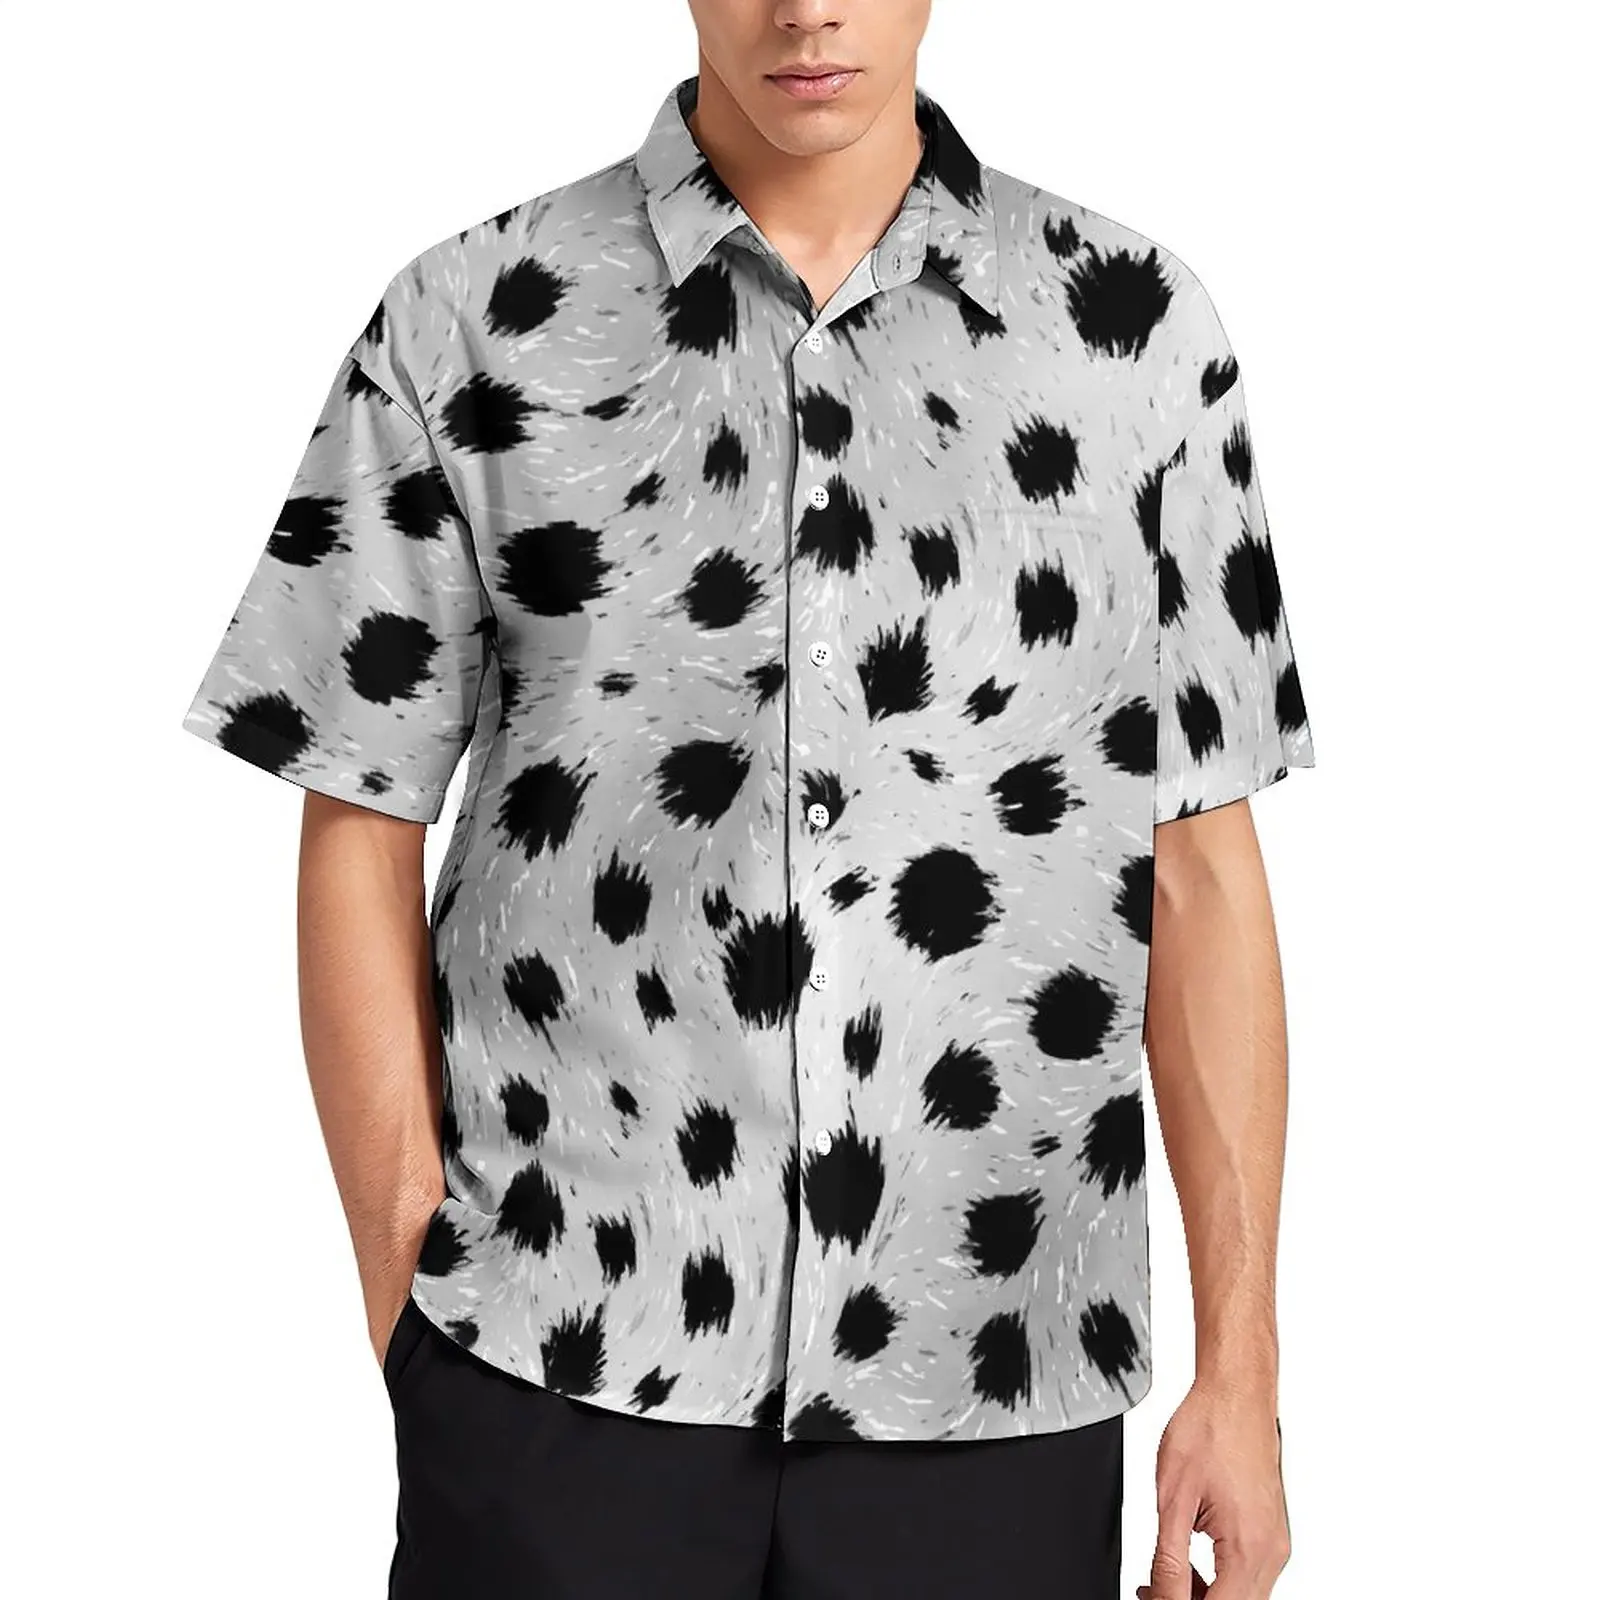 

Dalmatian Spots Print Vacation Shirt Black and White Hawaii Casual Shirts Streetwear Blouses Short-Sleeve Graphic Tops Plus Size